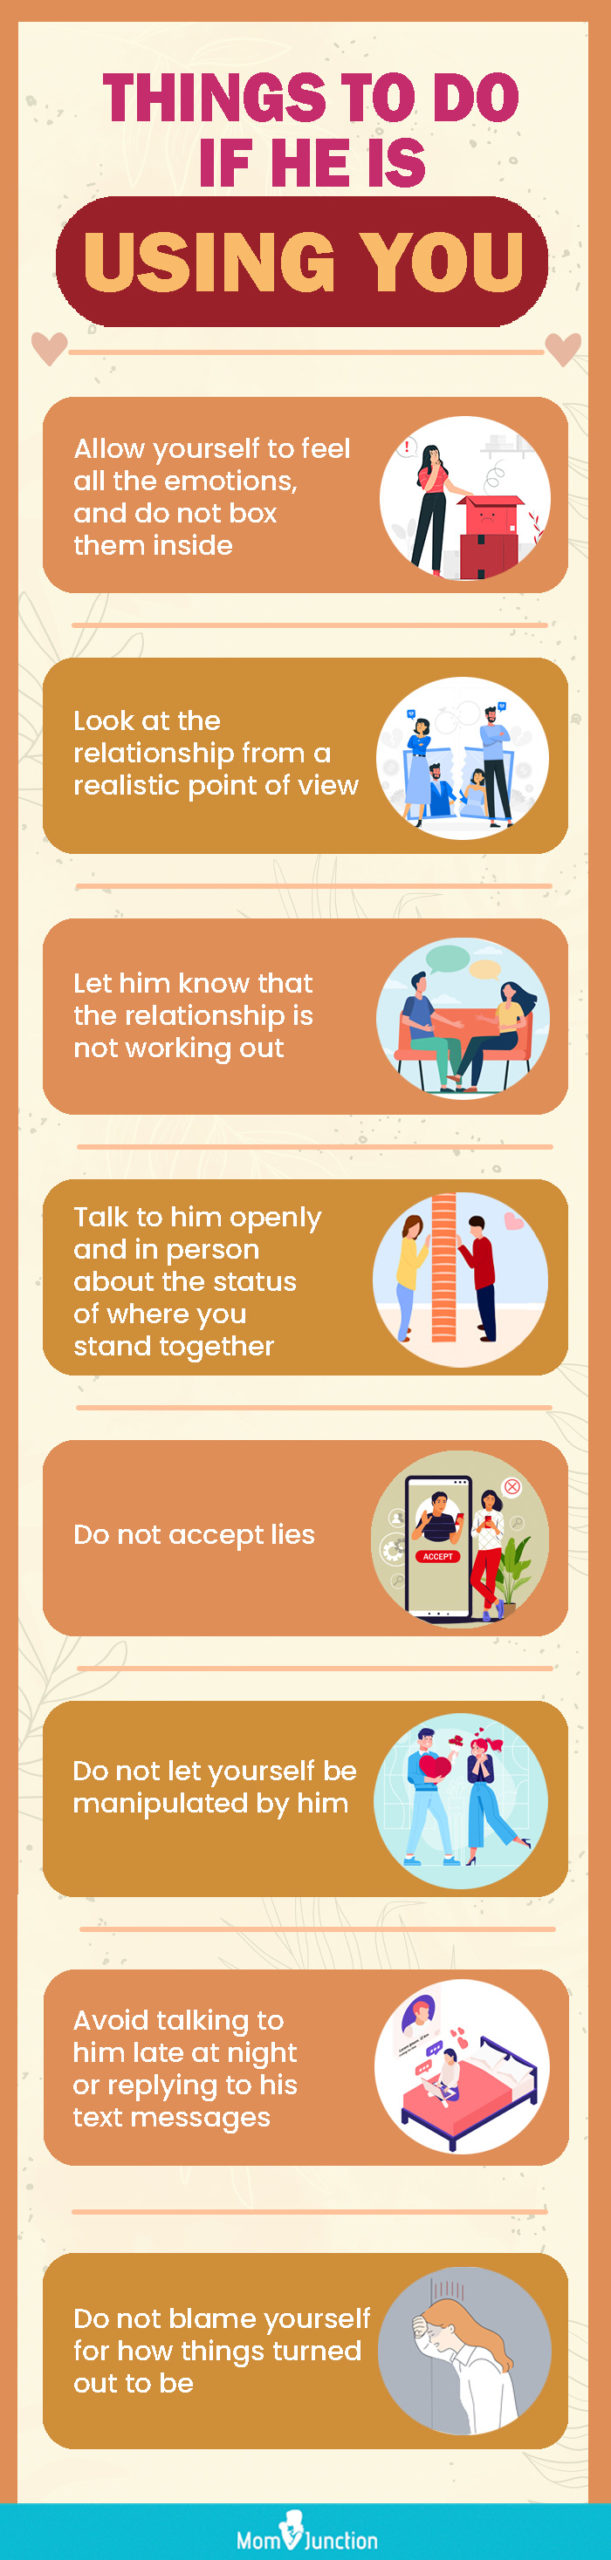 things to do if he is using you (infographic)